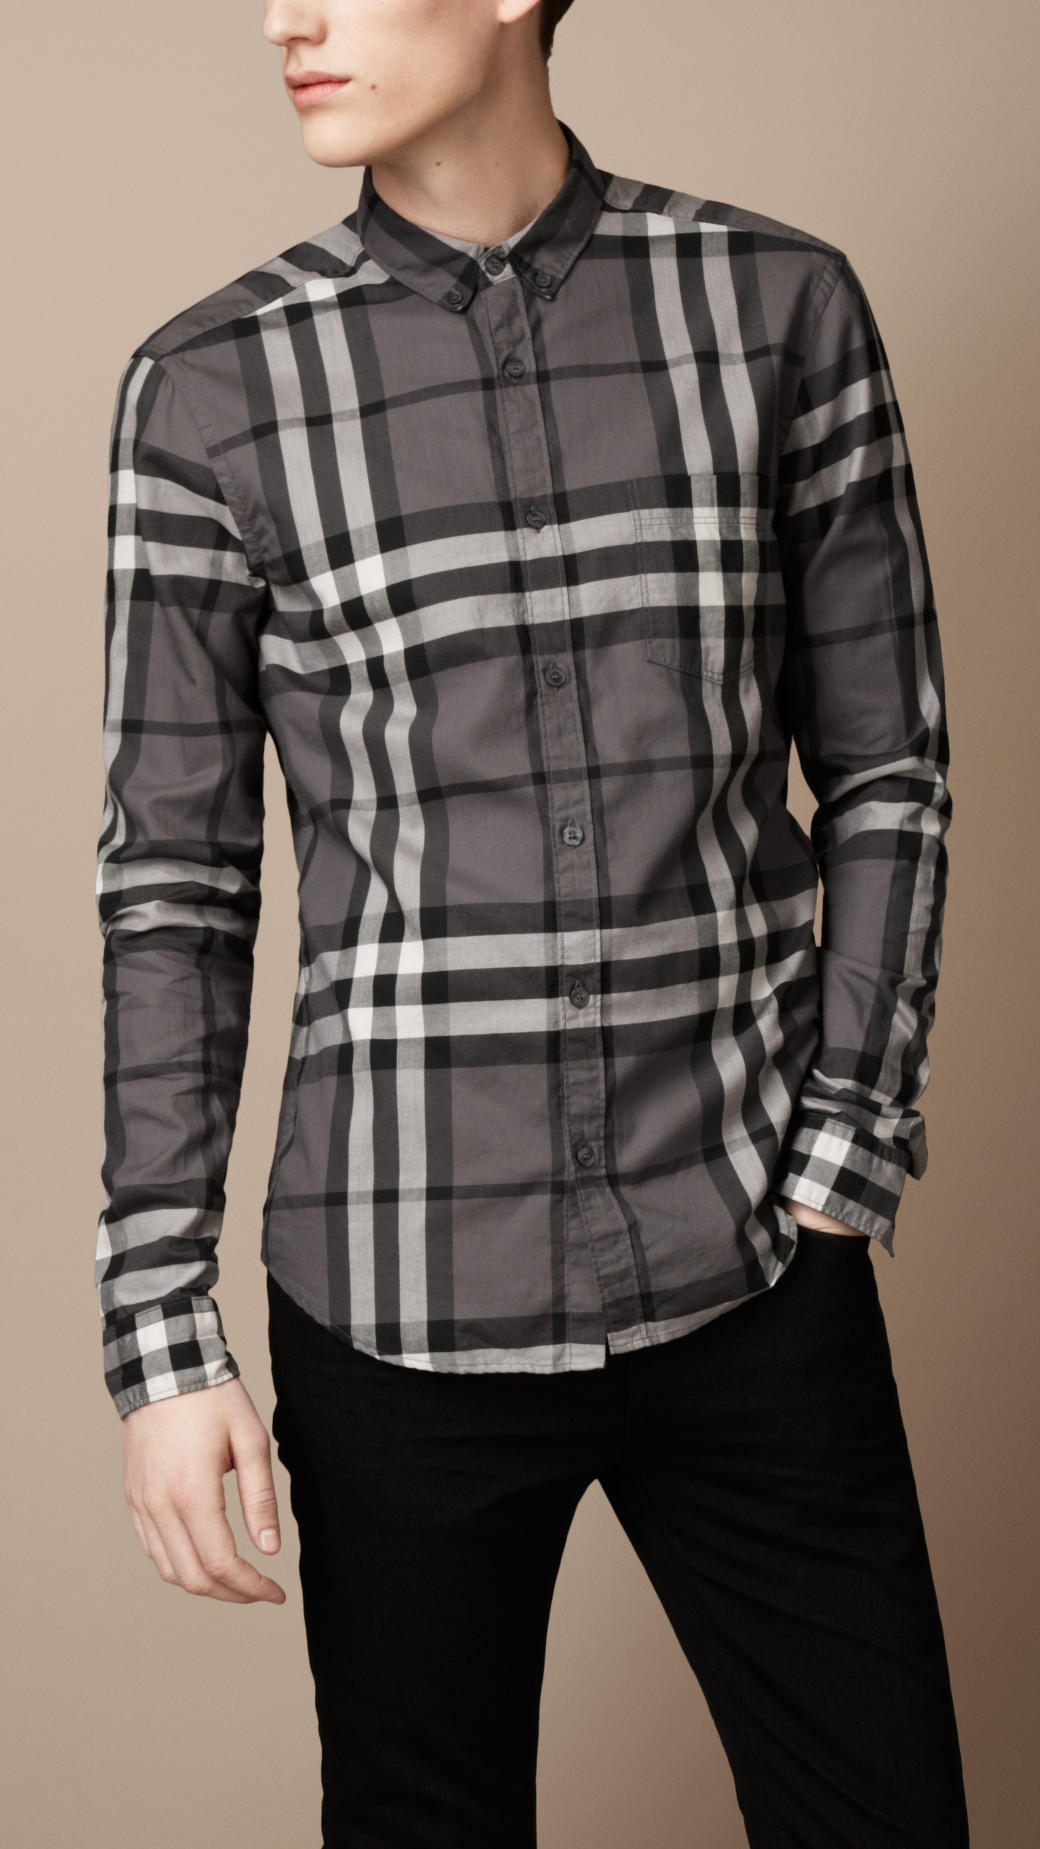 Burberry Brit Exploded Check Cotton Shirt in Grey (Gray) for Men - Lyst